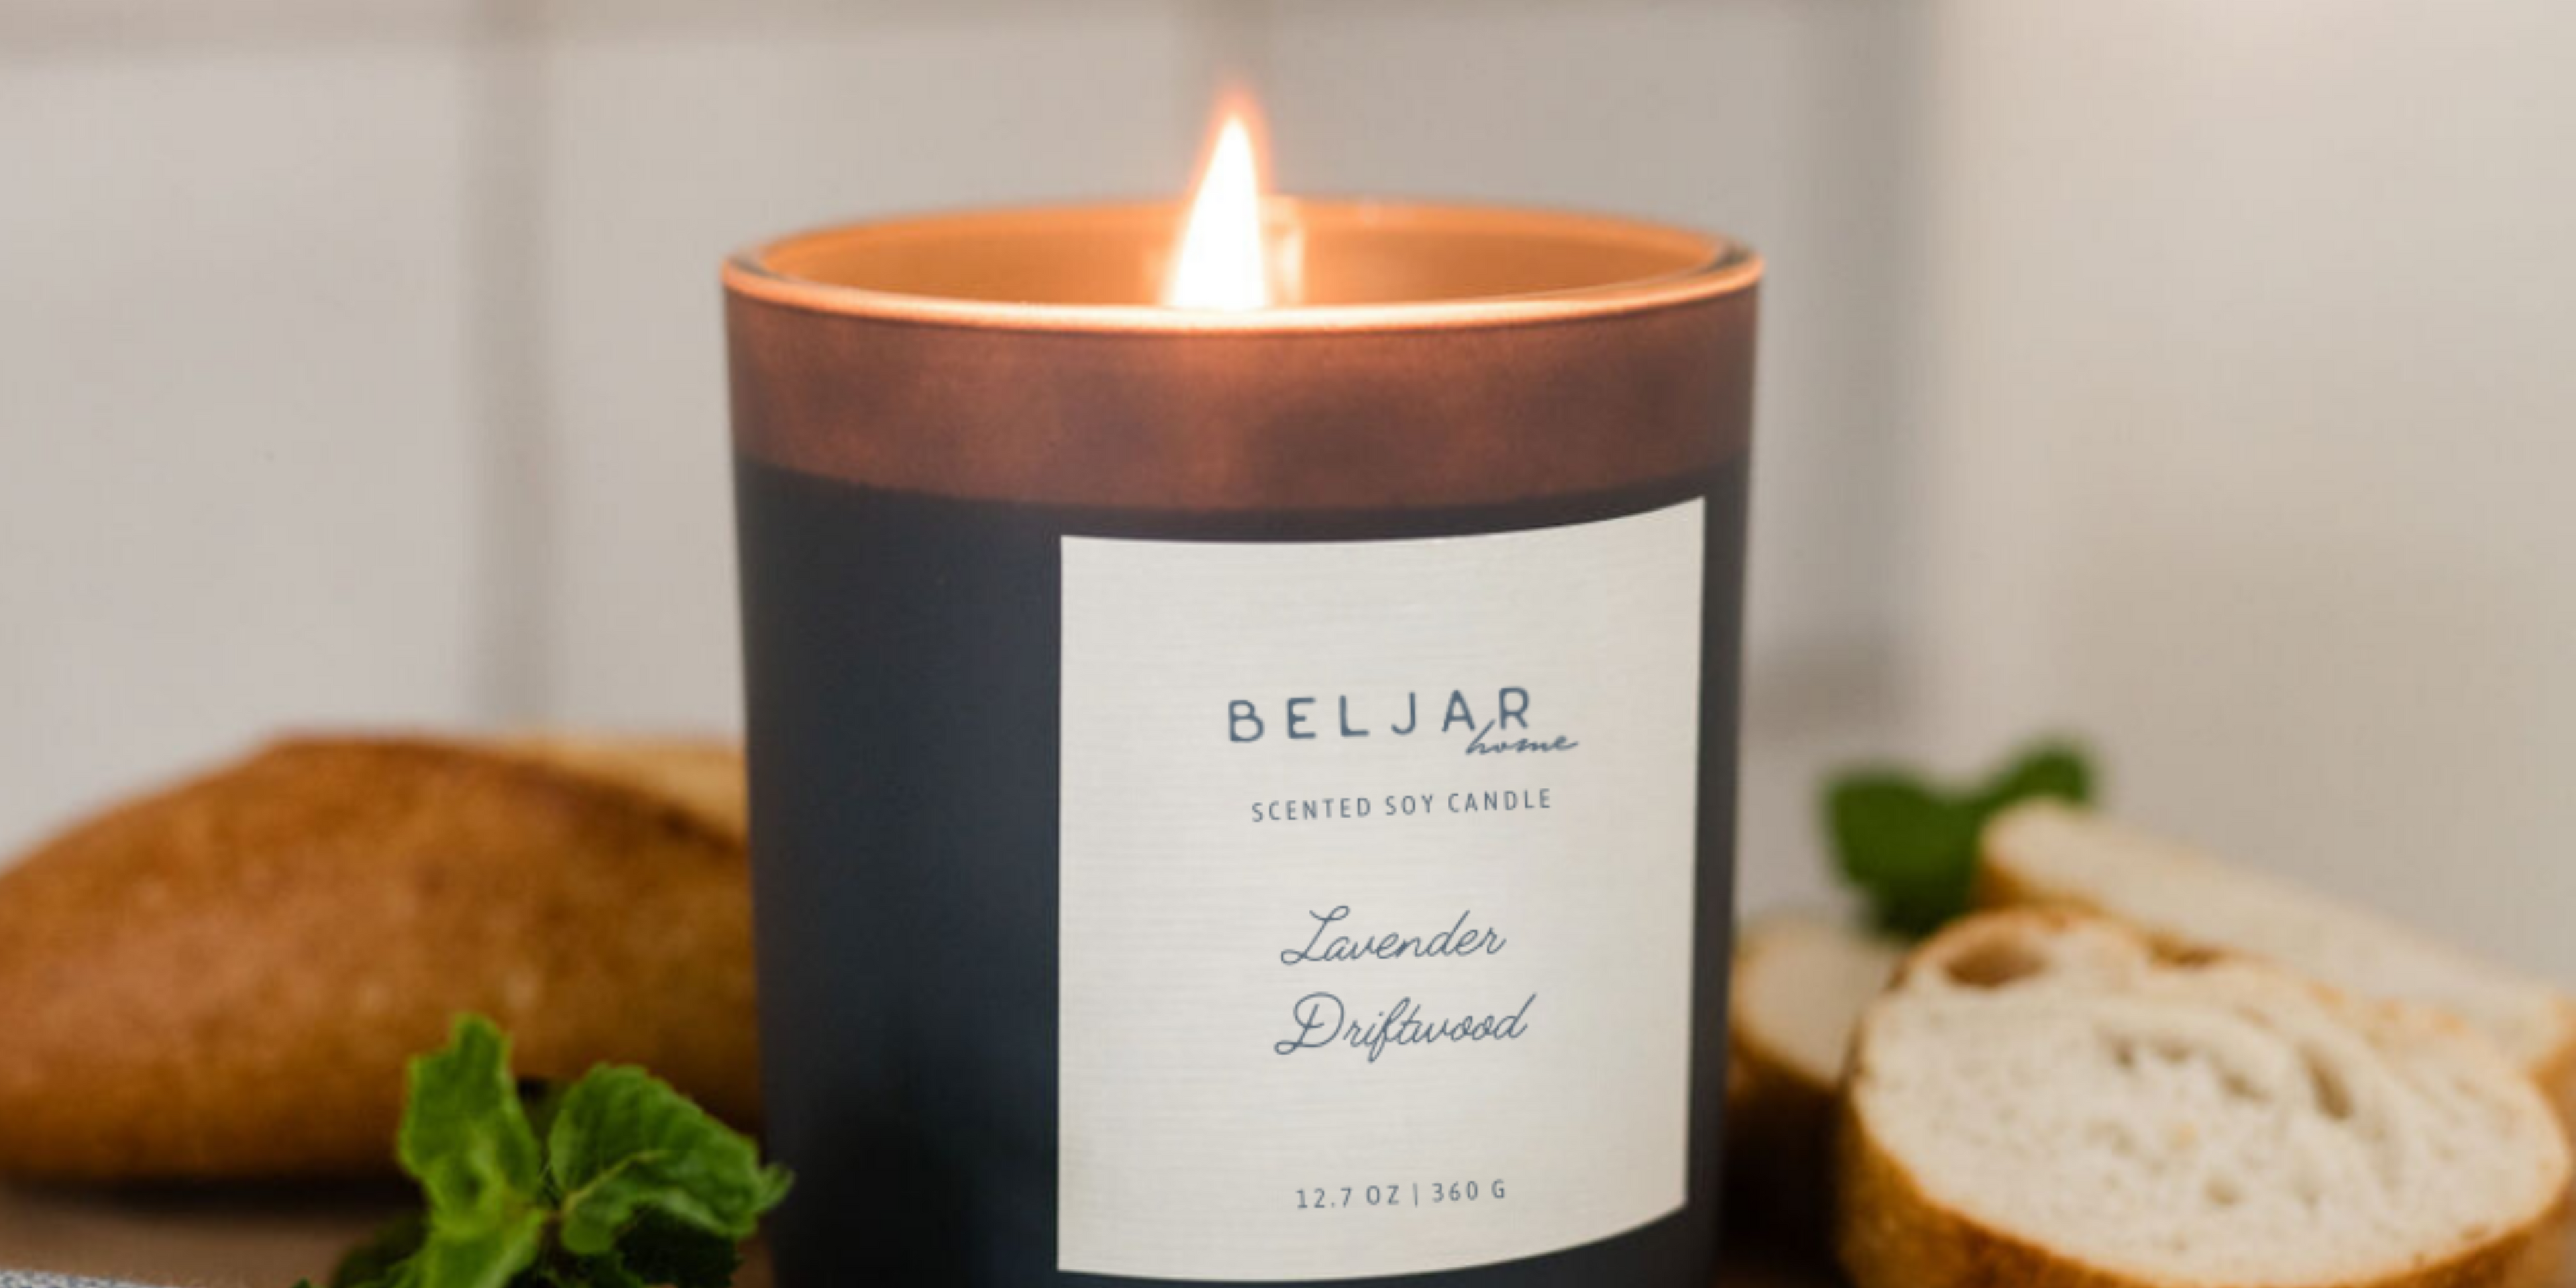 Luxury private label candles for home and gift shops